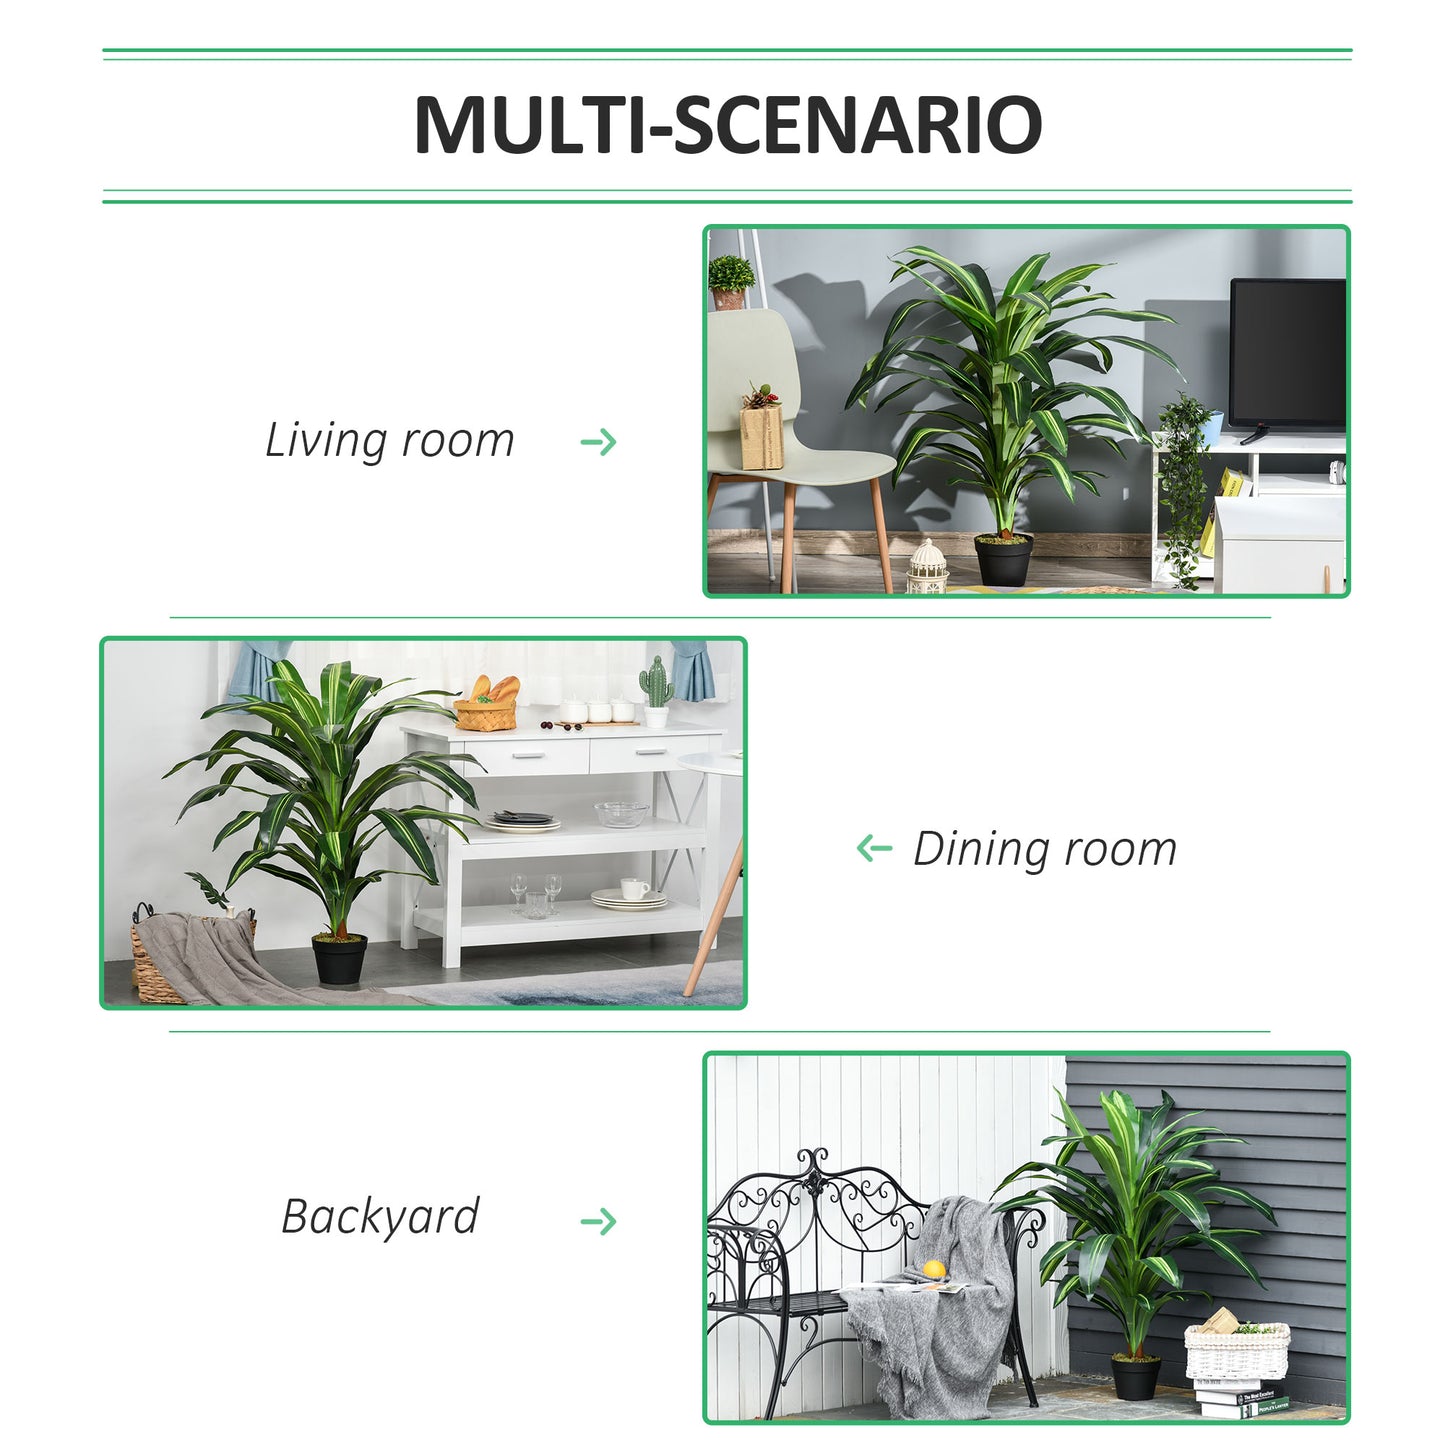 Outsunny 110cm/3.6FT Artificial Dracaena Tree Decorative Plant 40 Leaves with Nursery Pot, Fake Tropical Tree for Indoor Outdoor Décor